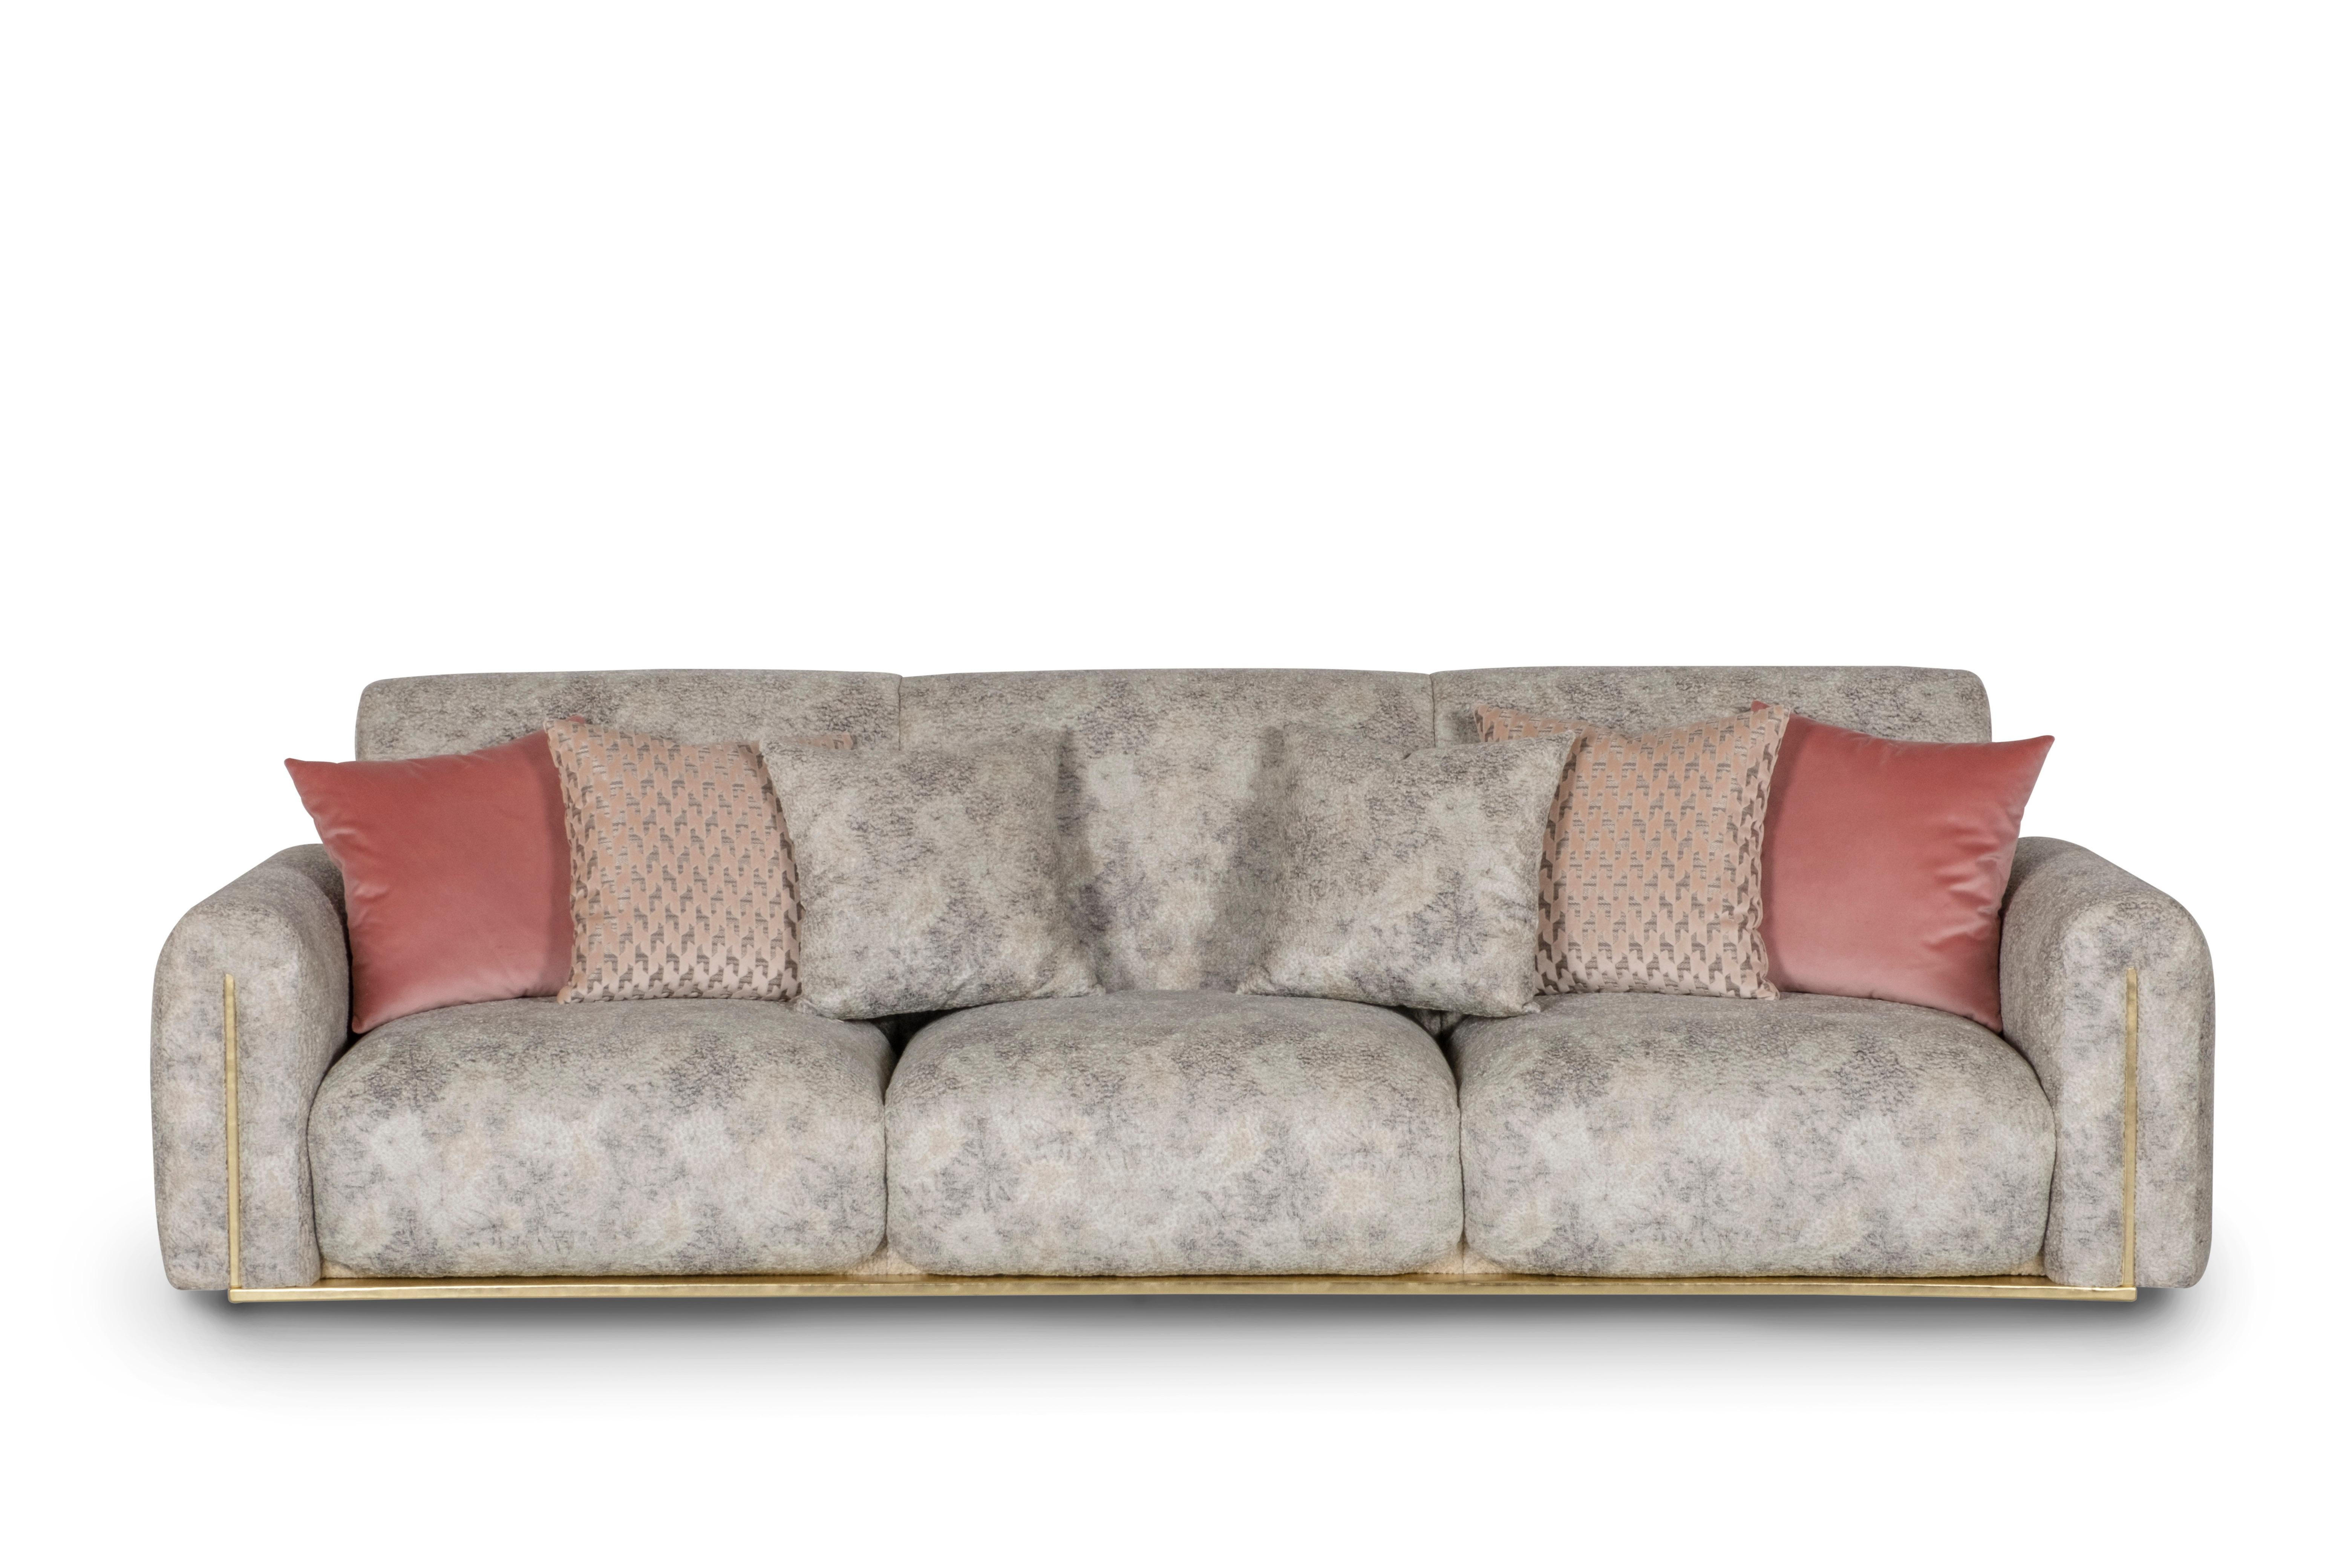 Beijinho 4-seat sofa, Contemporary Collection, Handcrafted in Portugal - Europe by Greenapple.

The Beijinho leather sofa seamlessly combines the soft texture of high-quality leather and enveloping, tufted comfort, creating a sensory experience